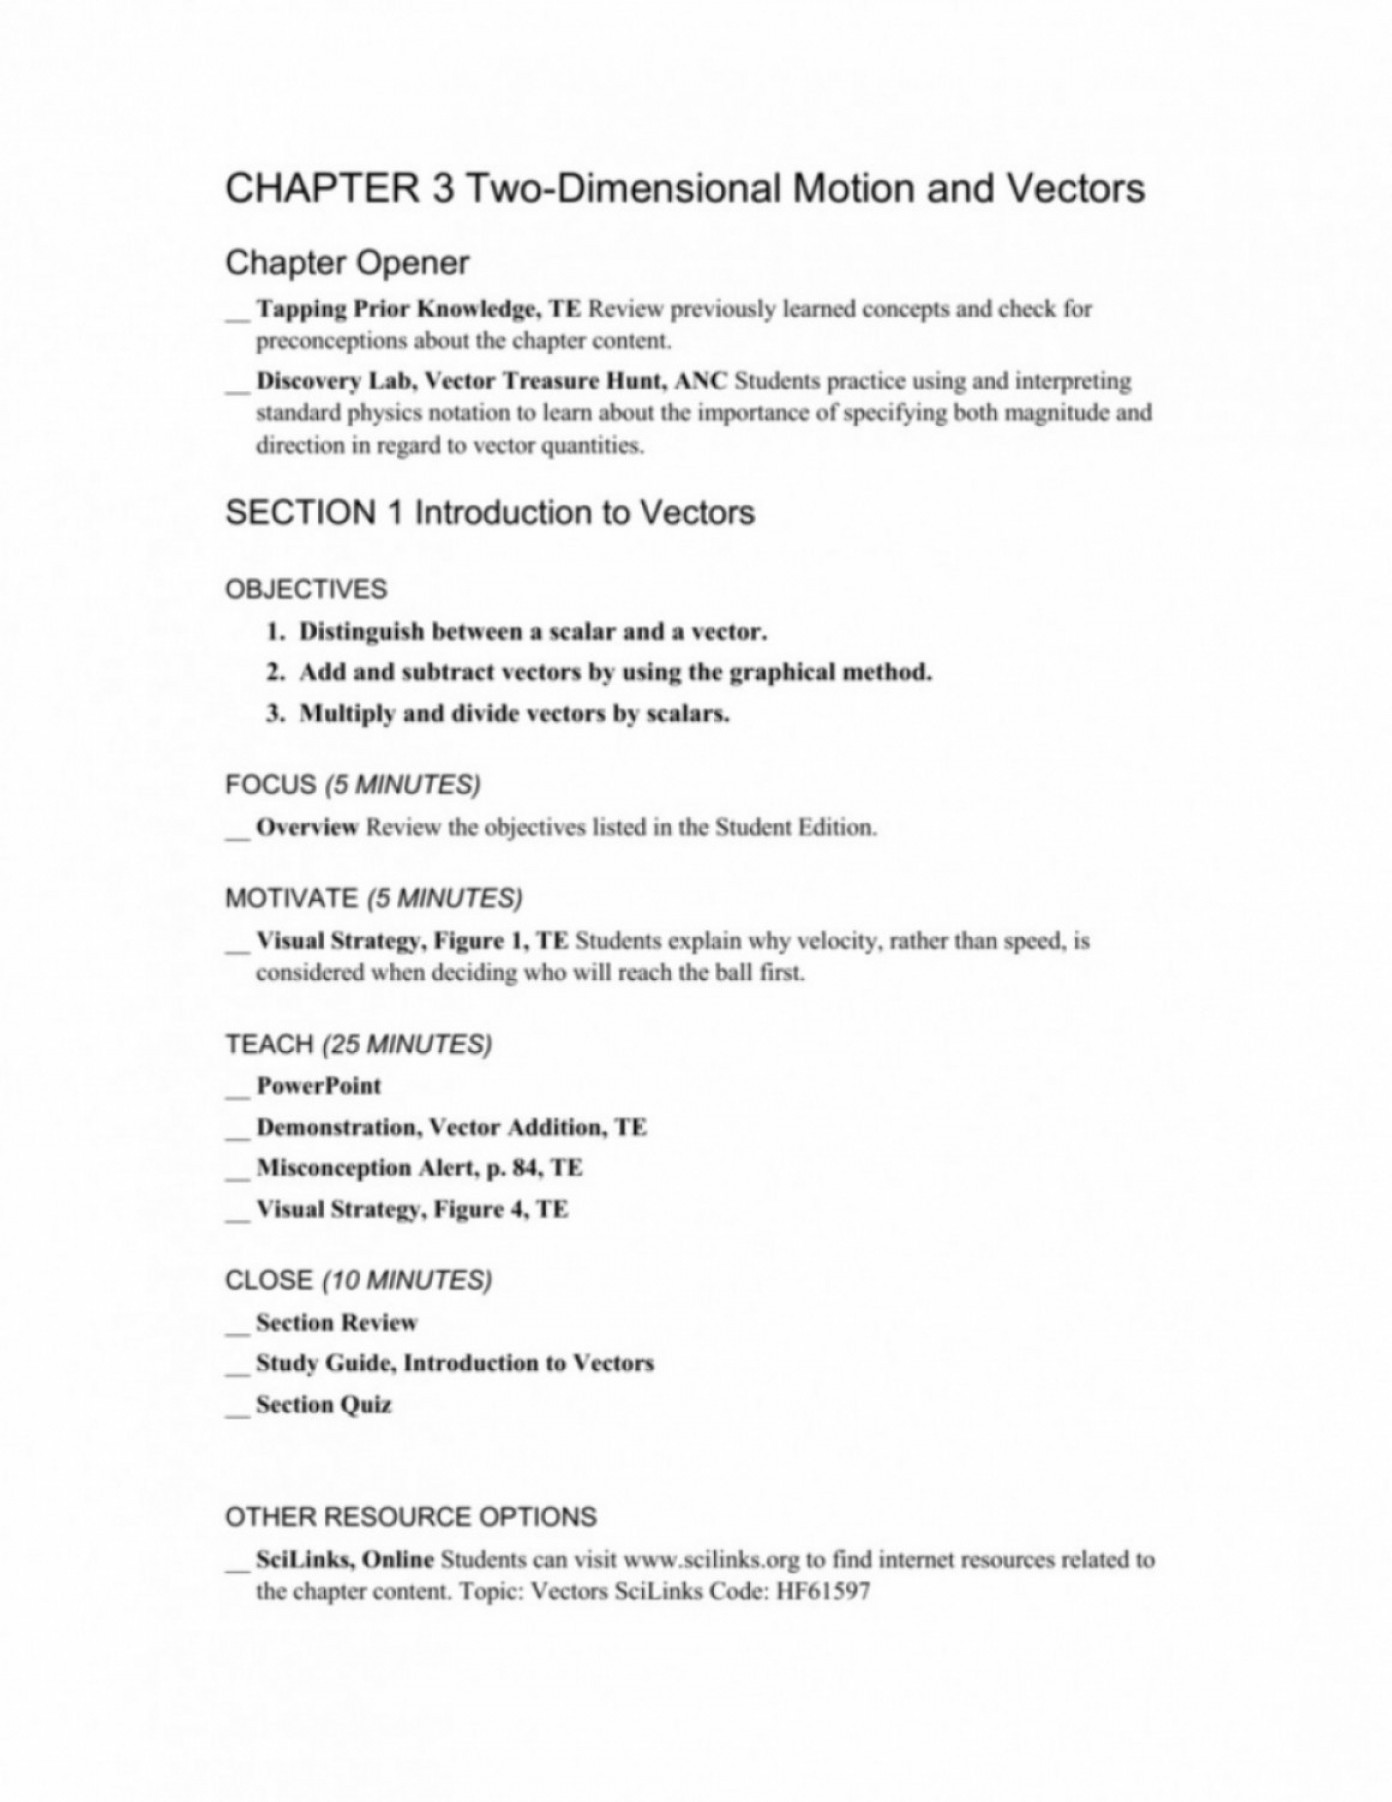 Vector Worksheet Physics Answers Physics Vectors Worksheet with Answers Promotiontablecovers